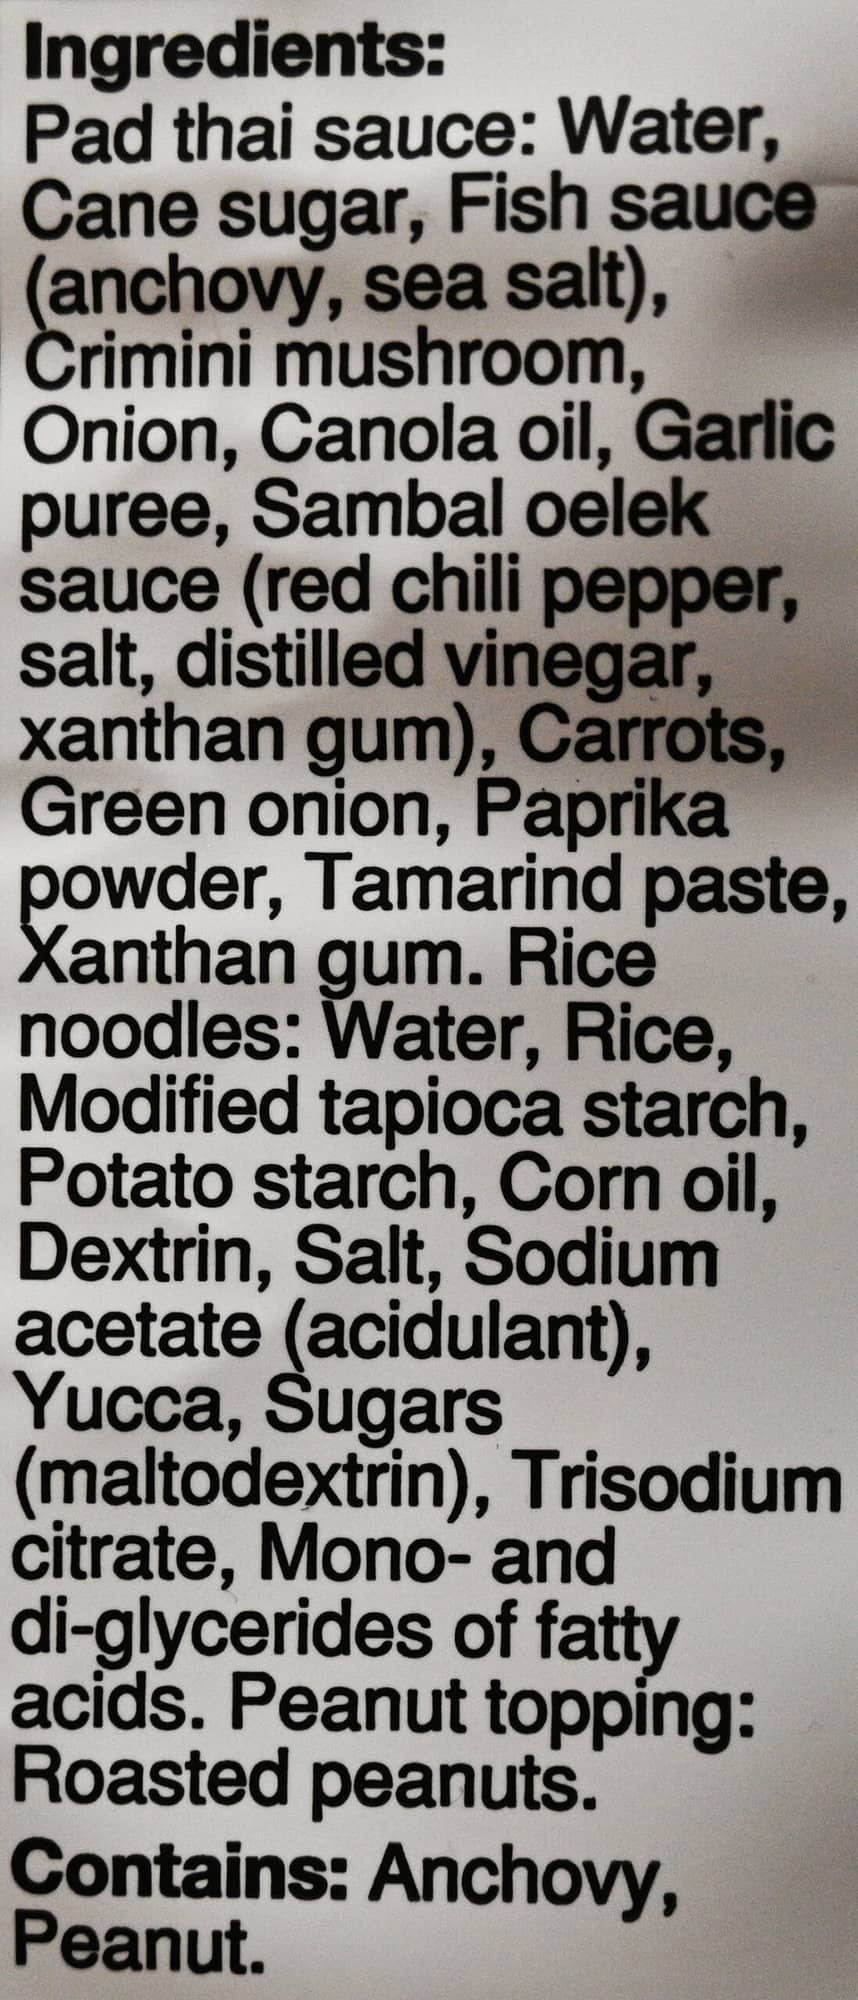 Image of the ingredients list from the back of the package.